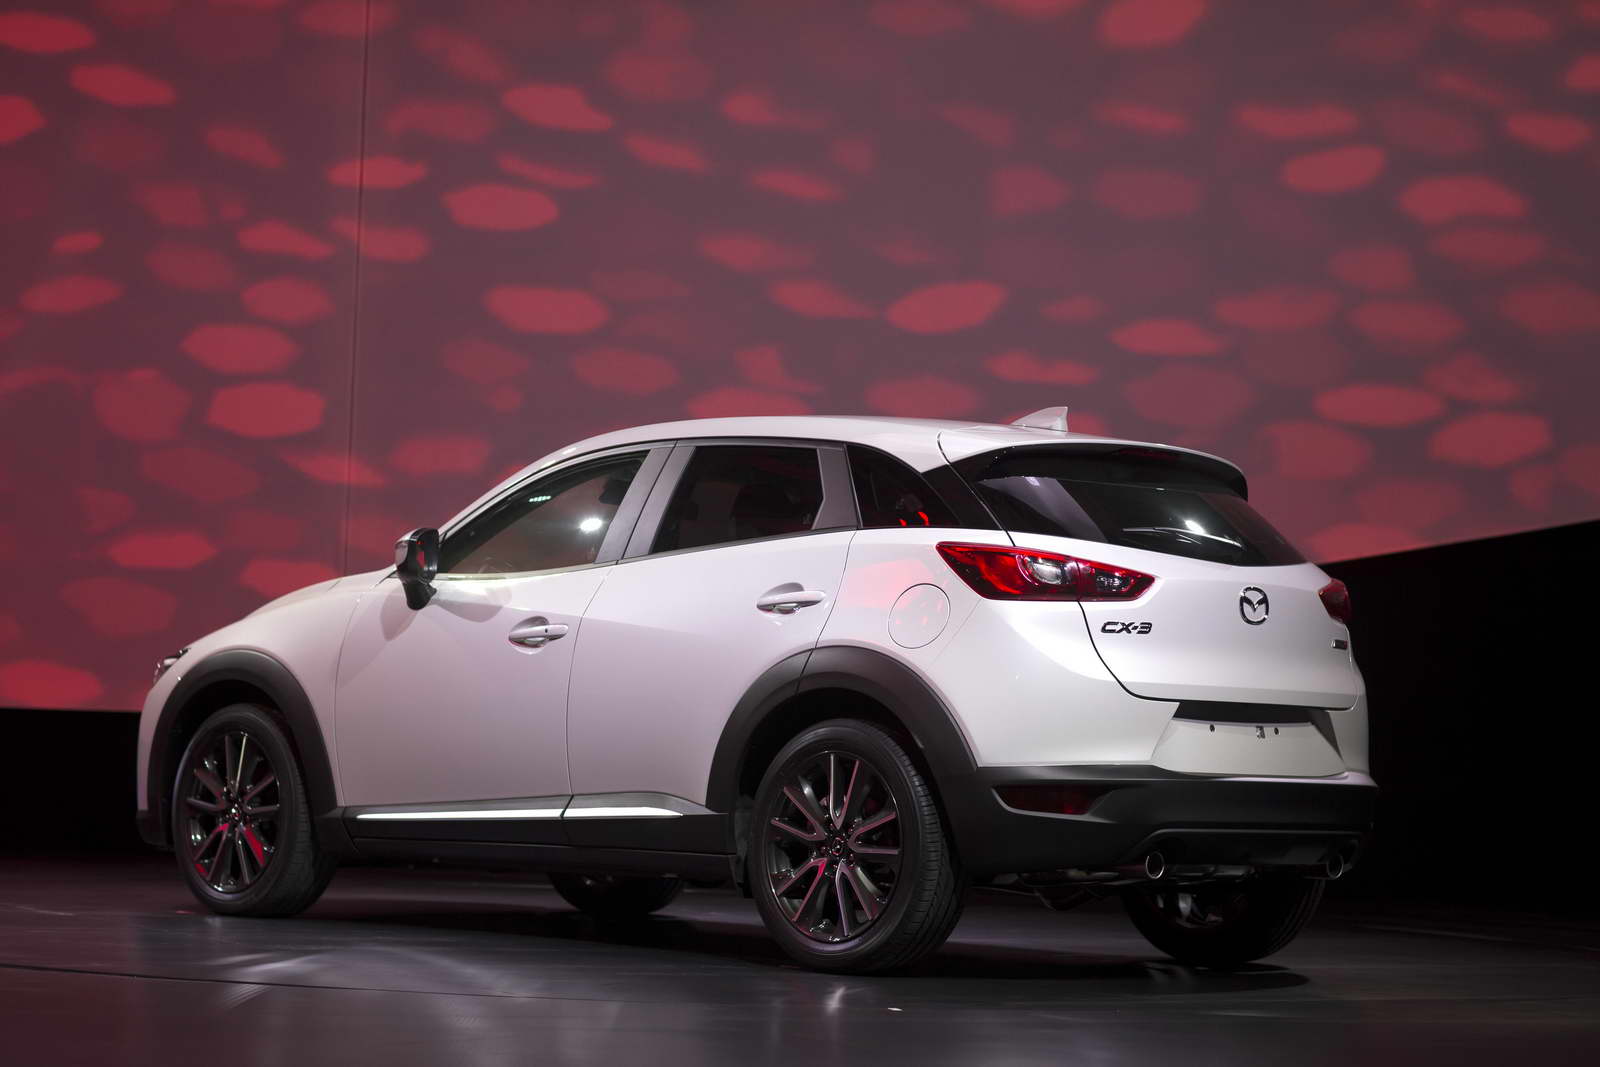 2016 Mazda CX3 EPAEstimated At 31 MPG Combined Carscoops